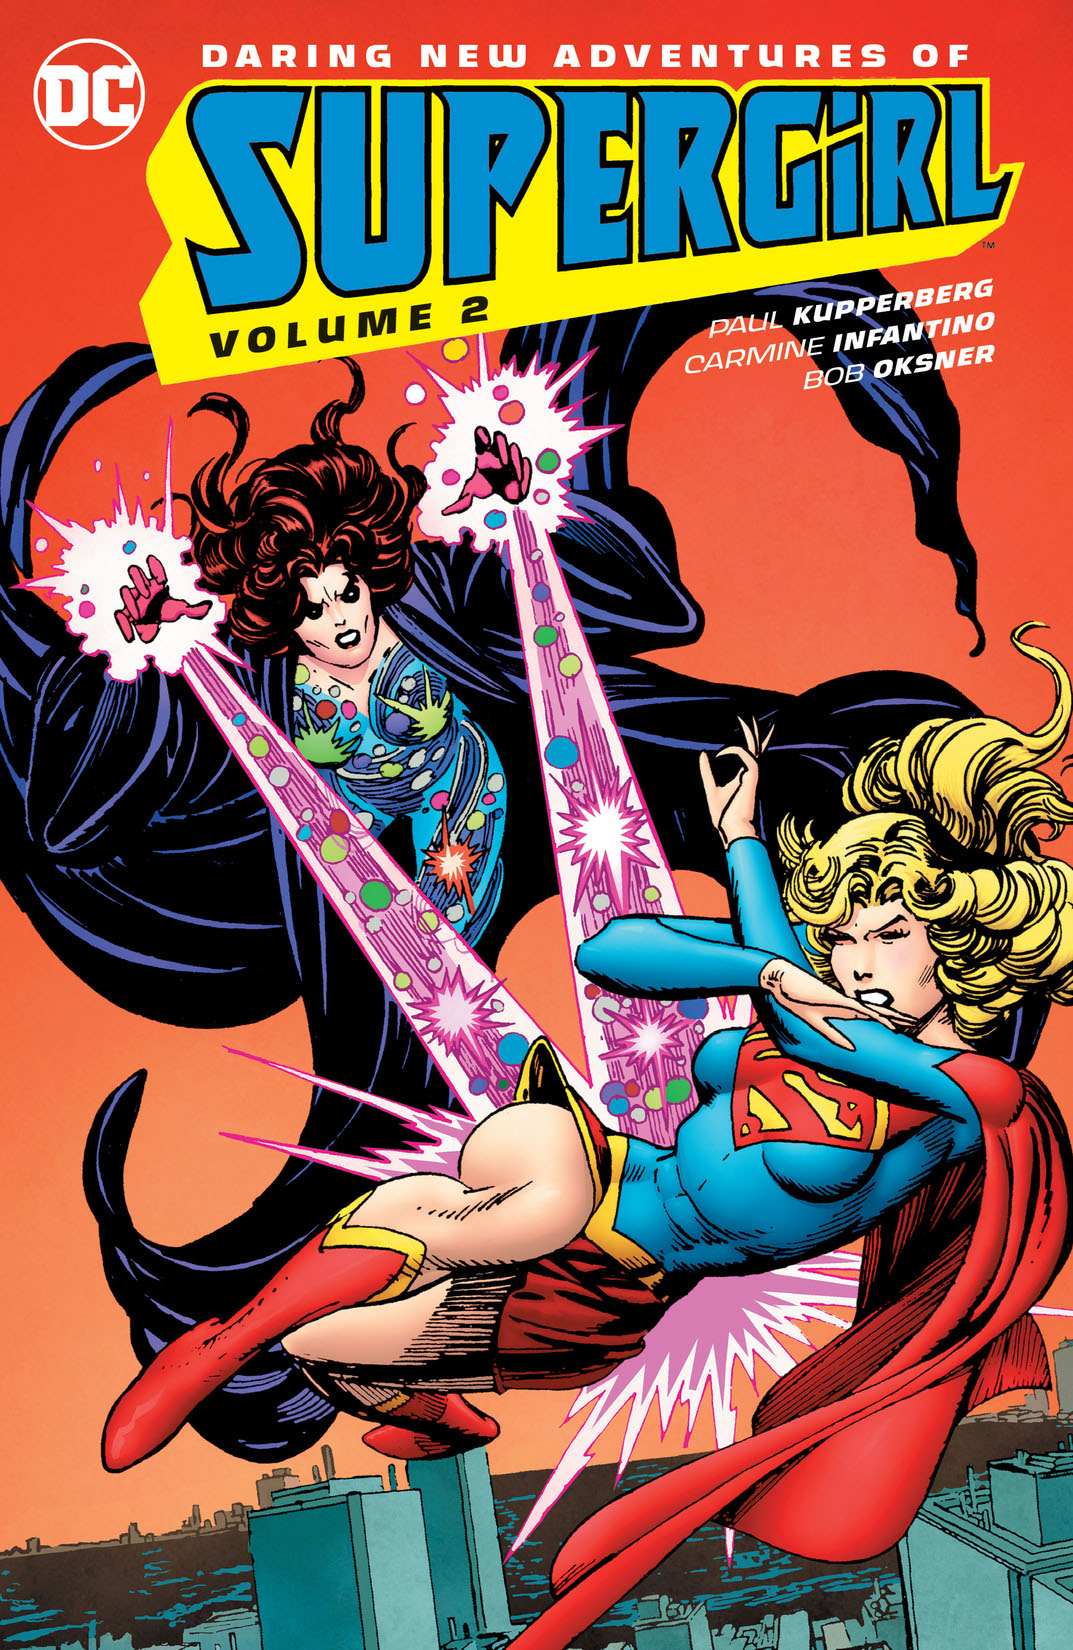 Daring New Adventures of Supergirl Vol. 2 preview images